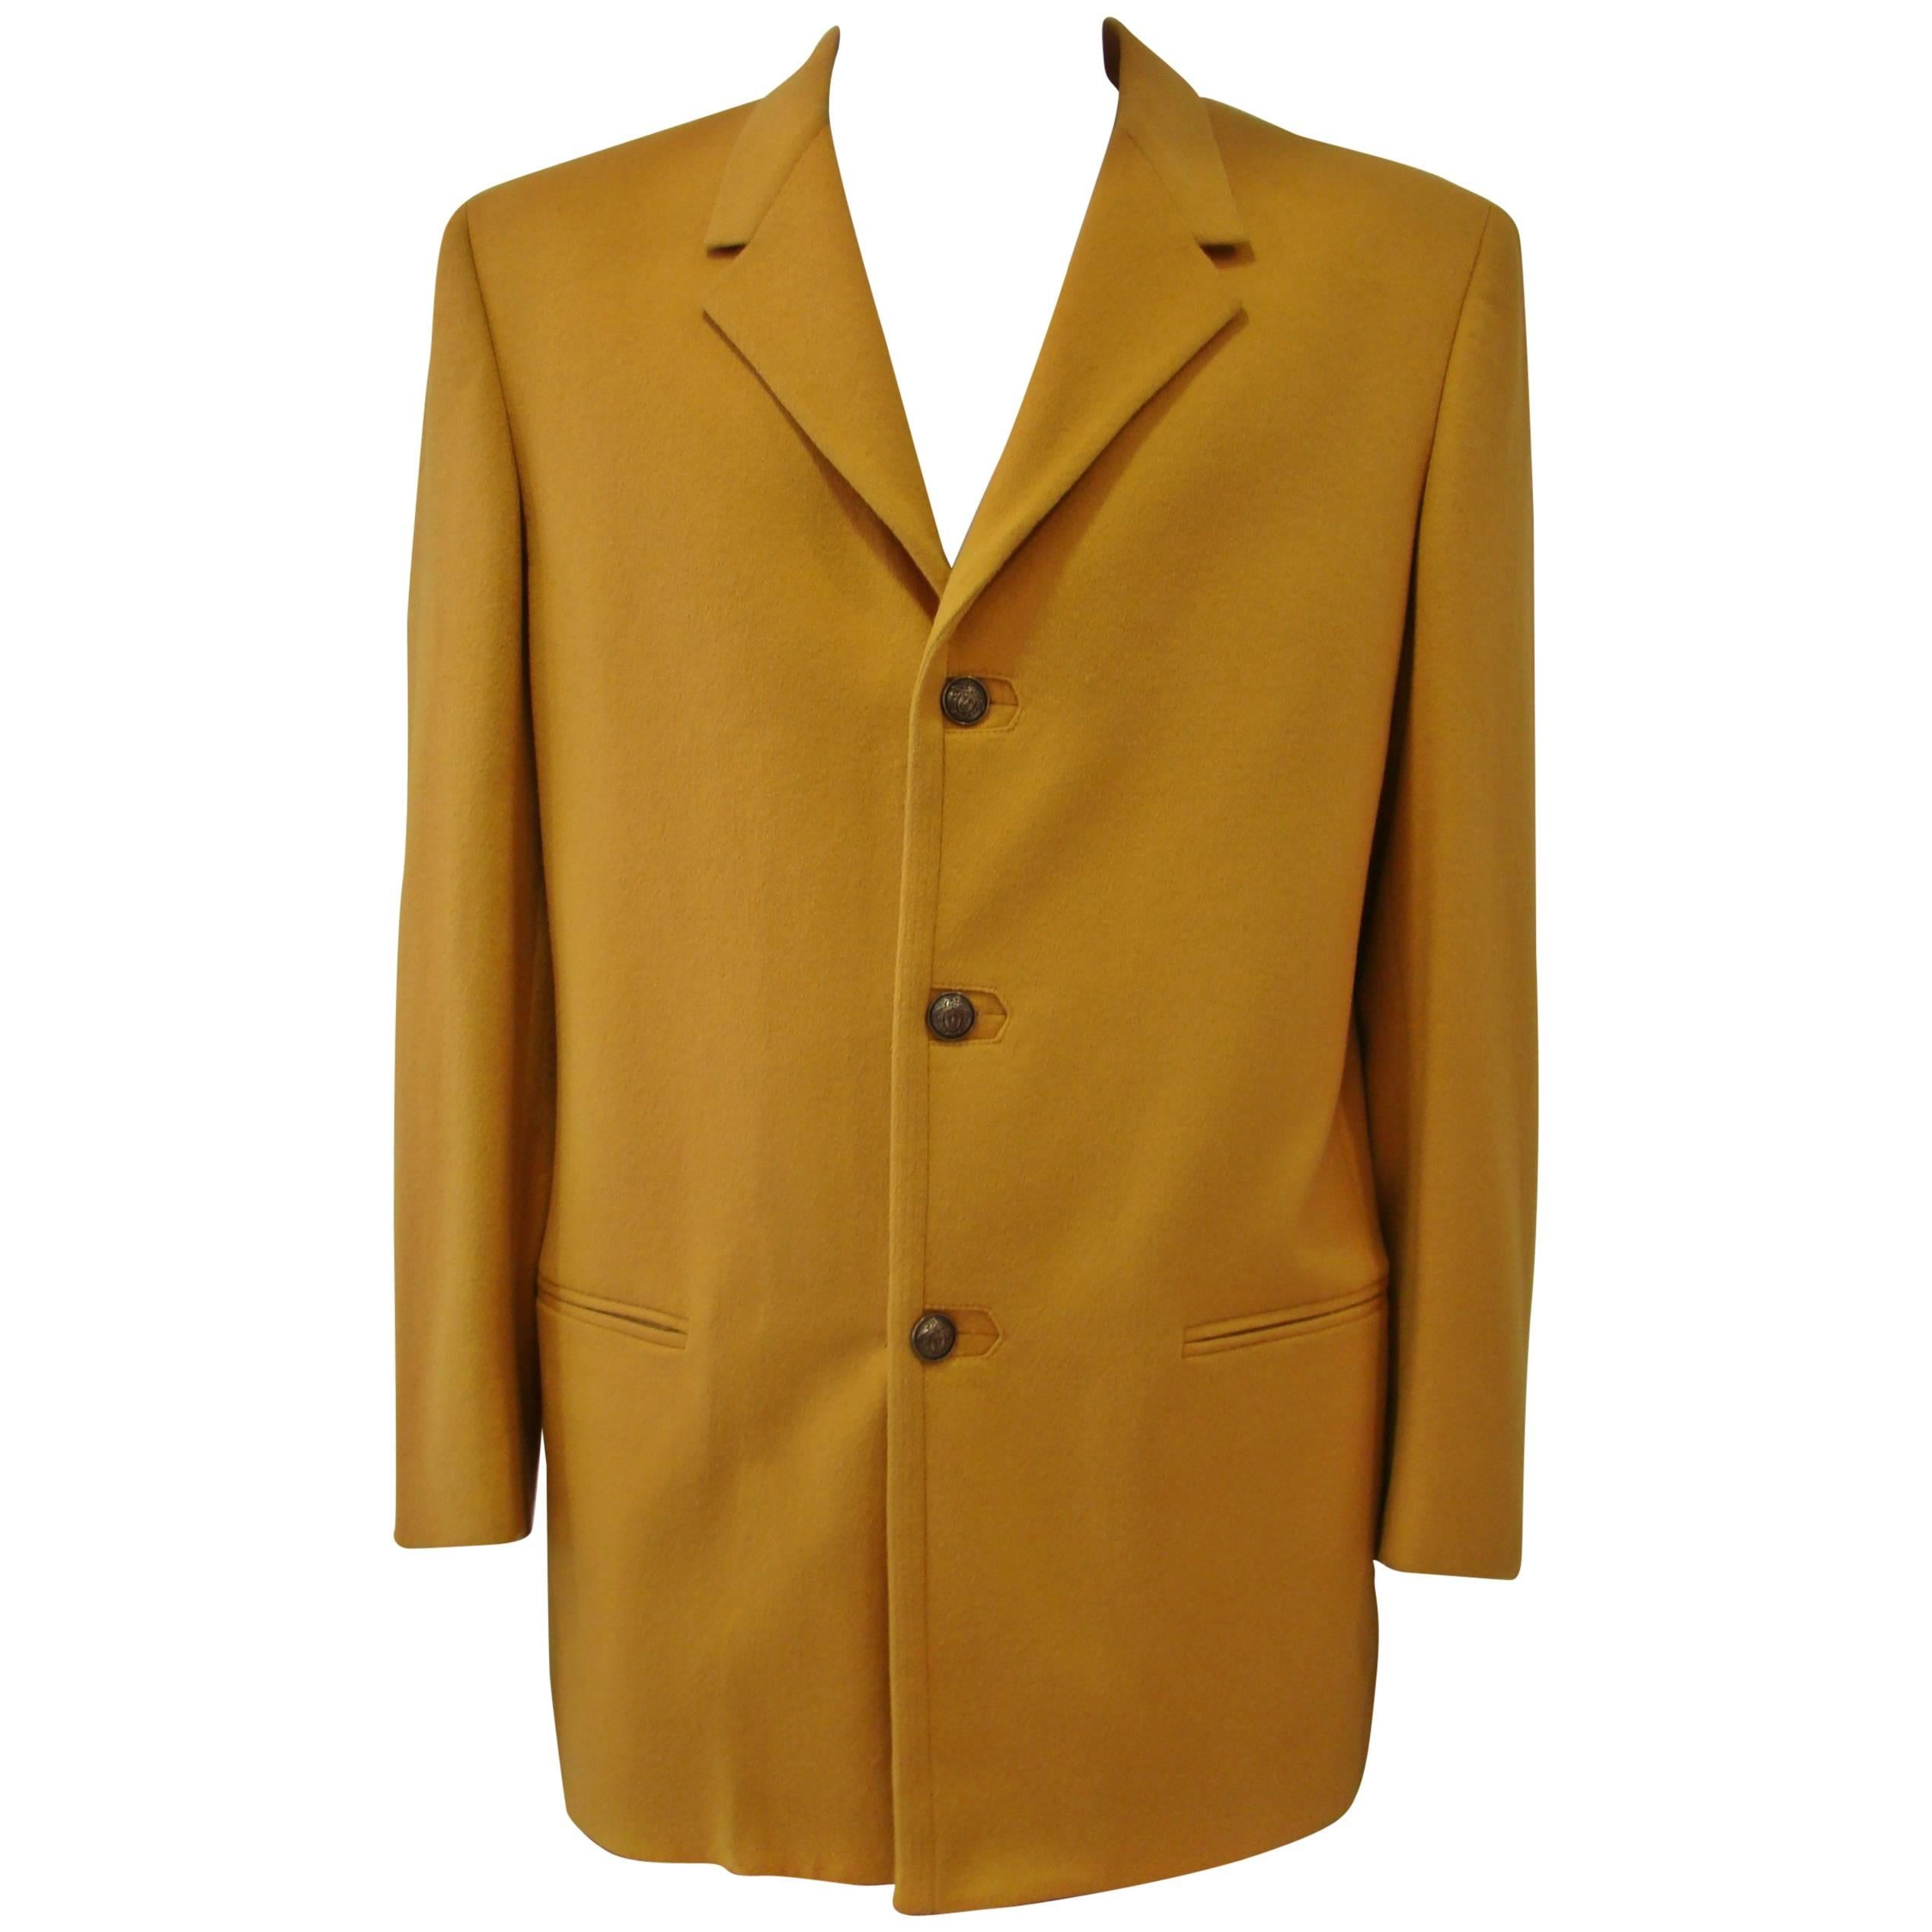 Rare Gianni Versace Mustard Wool Jacket For Sale